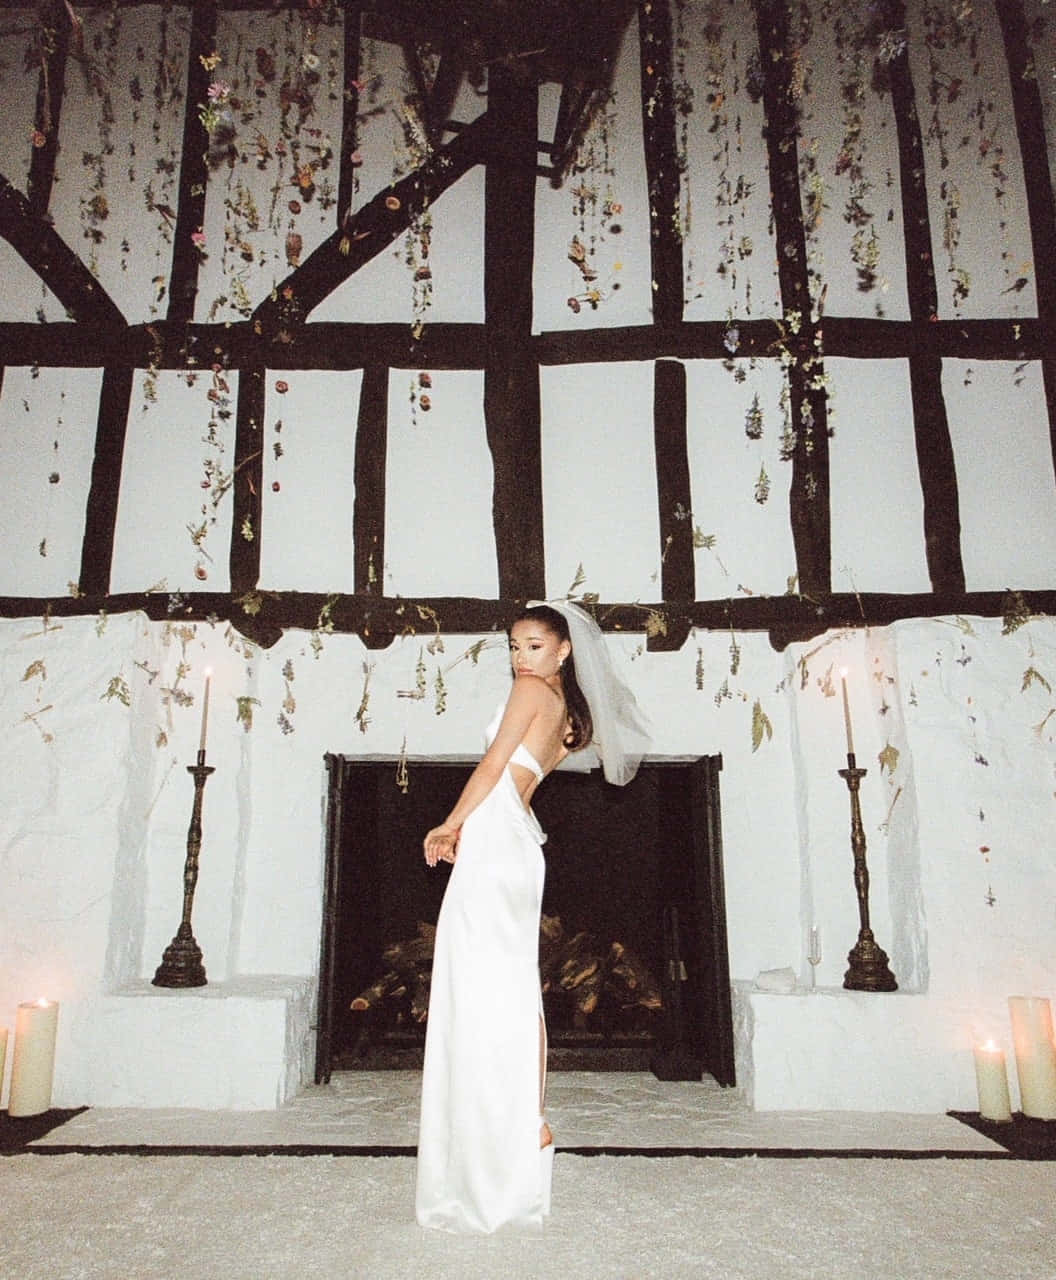 Ariana Grande Modeling In Front Of Wedding Reception Picture